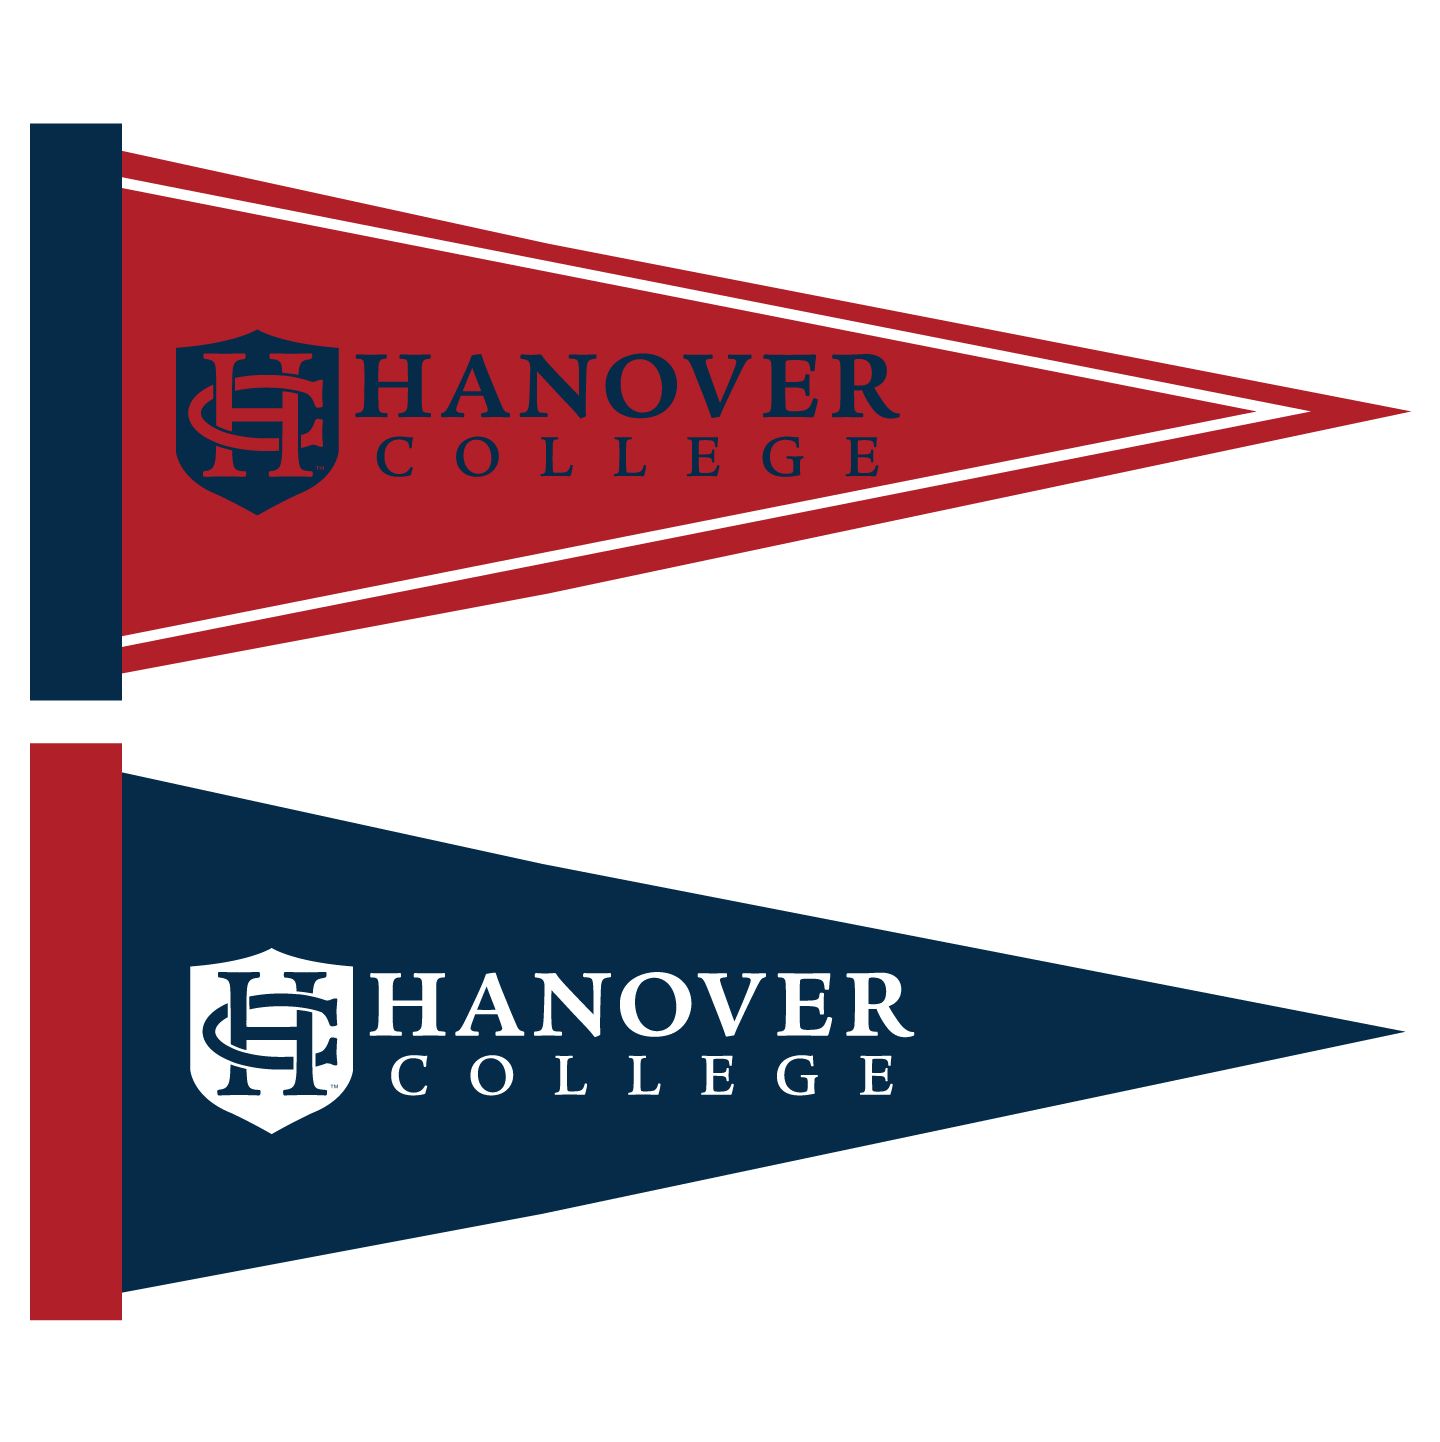 Hanover College maroon and navy pennants.